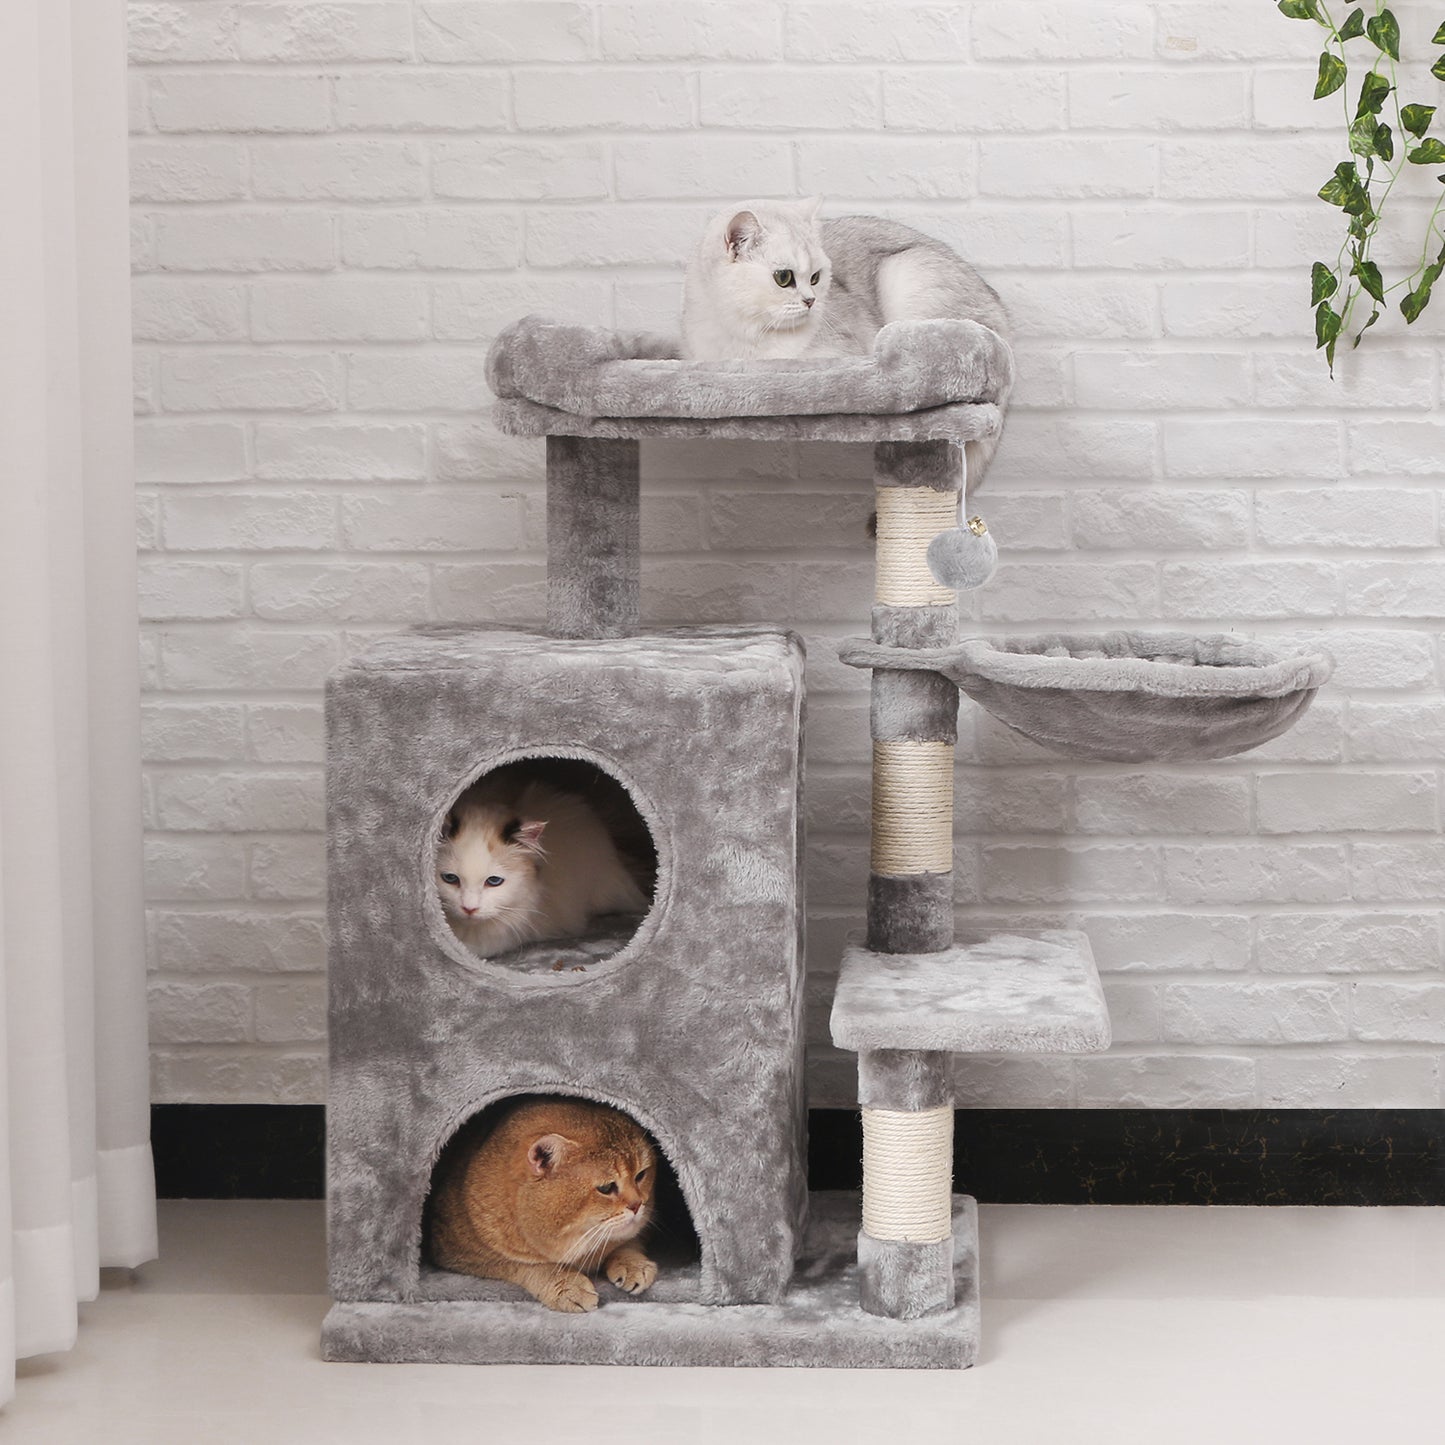 BEWISHOME Cat Tree Condo with Sisal Scratching Posts, Plush Perch, Dual Houses and Basket, Cat Tower Furniture Kitty Activity Center Kitten Play House MMJ06L